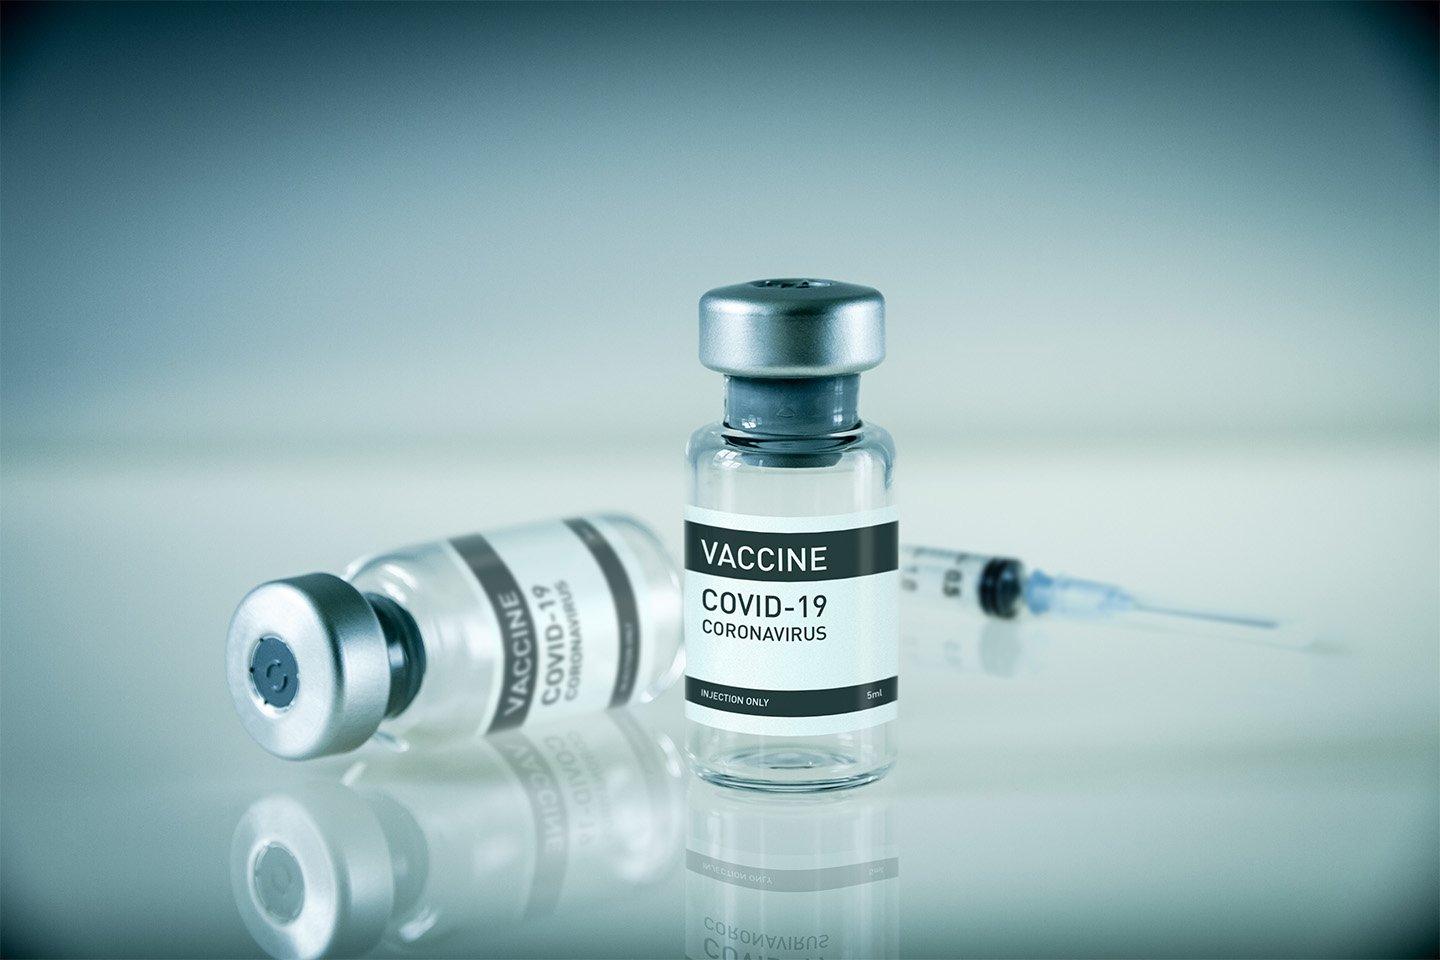 American Hospital Association Launches COVID-19 Vaccination Education Campaign